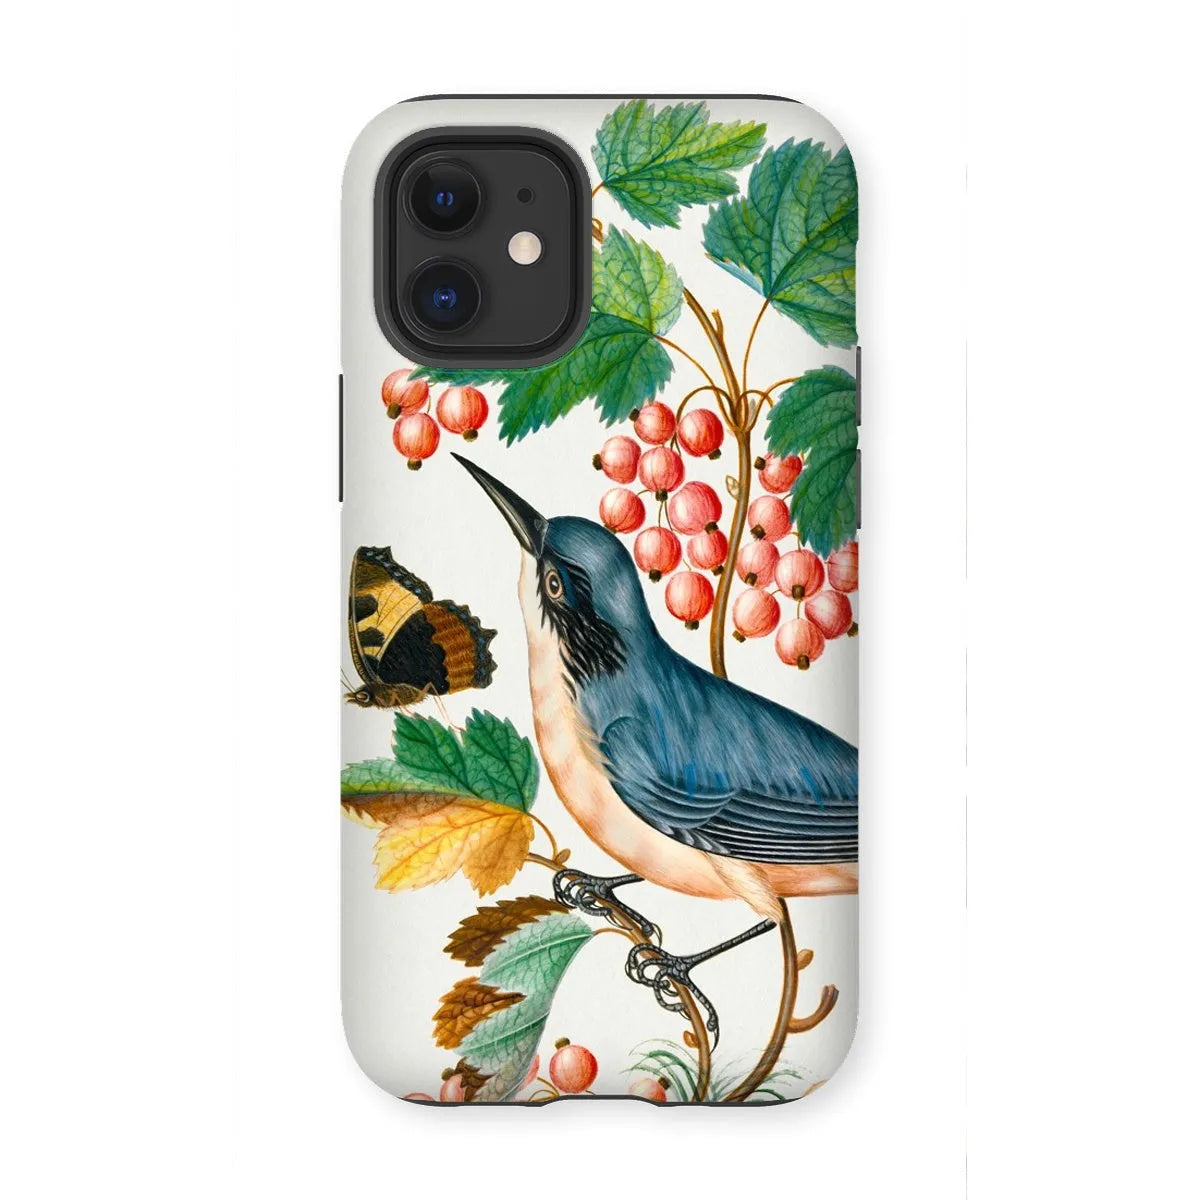 Warbler Admiral Wasps & Ants - Art Phone Case - James Bolton - Iphone 12 Mini / Matte - Mobile Phone Cases - Aesthetic